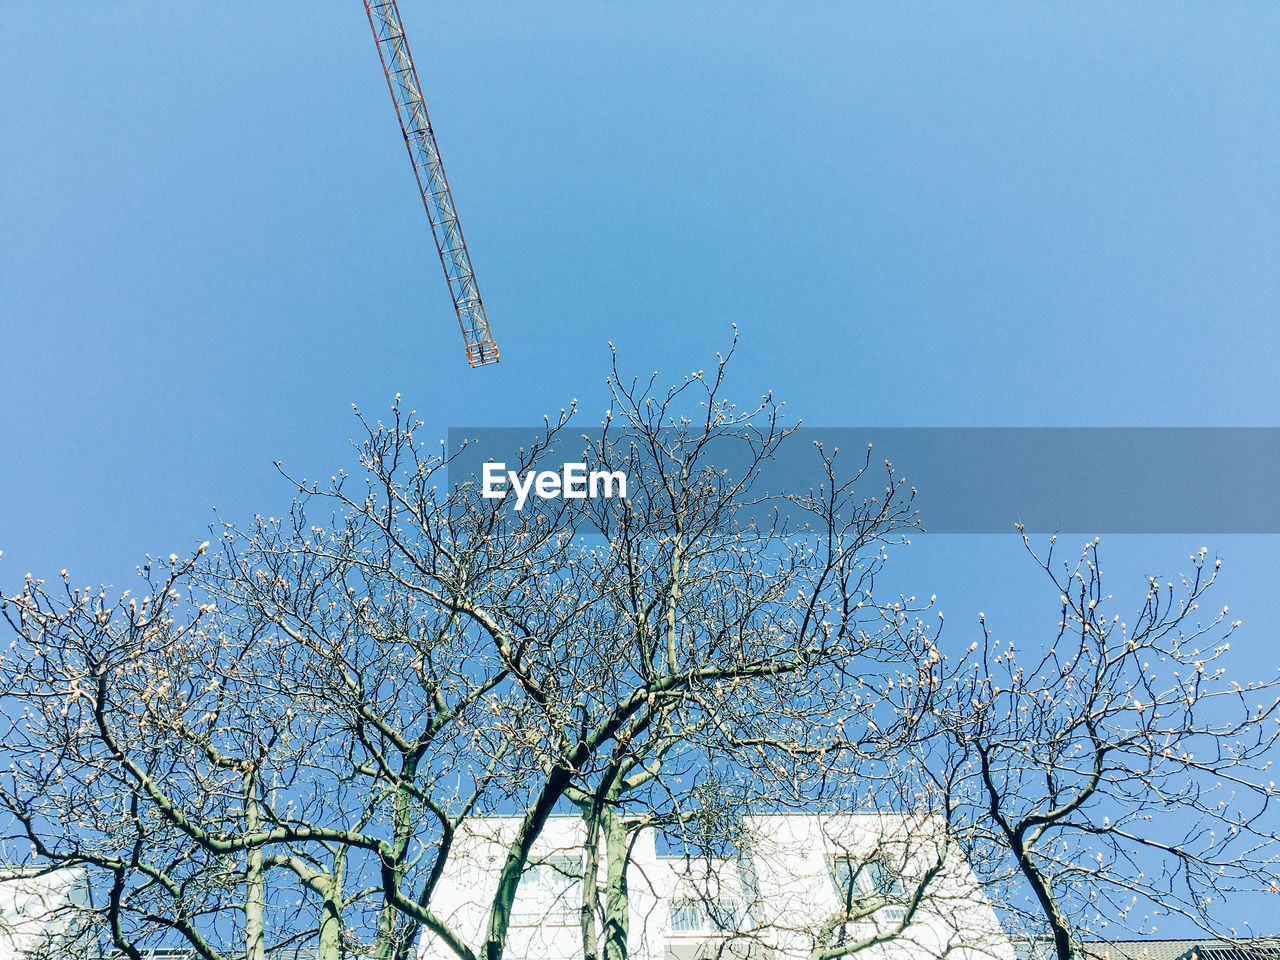 Low angle view of bare trees by building against clear blue sky